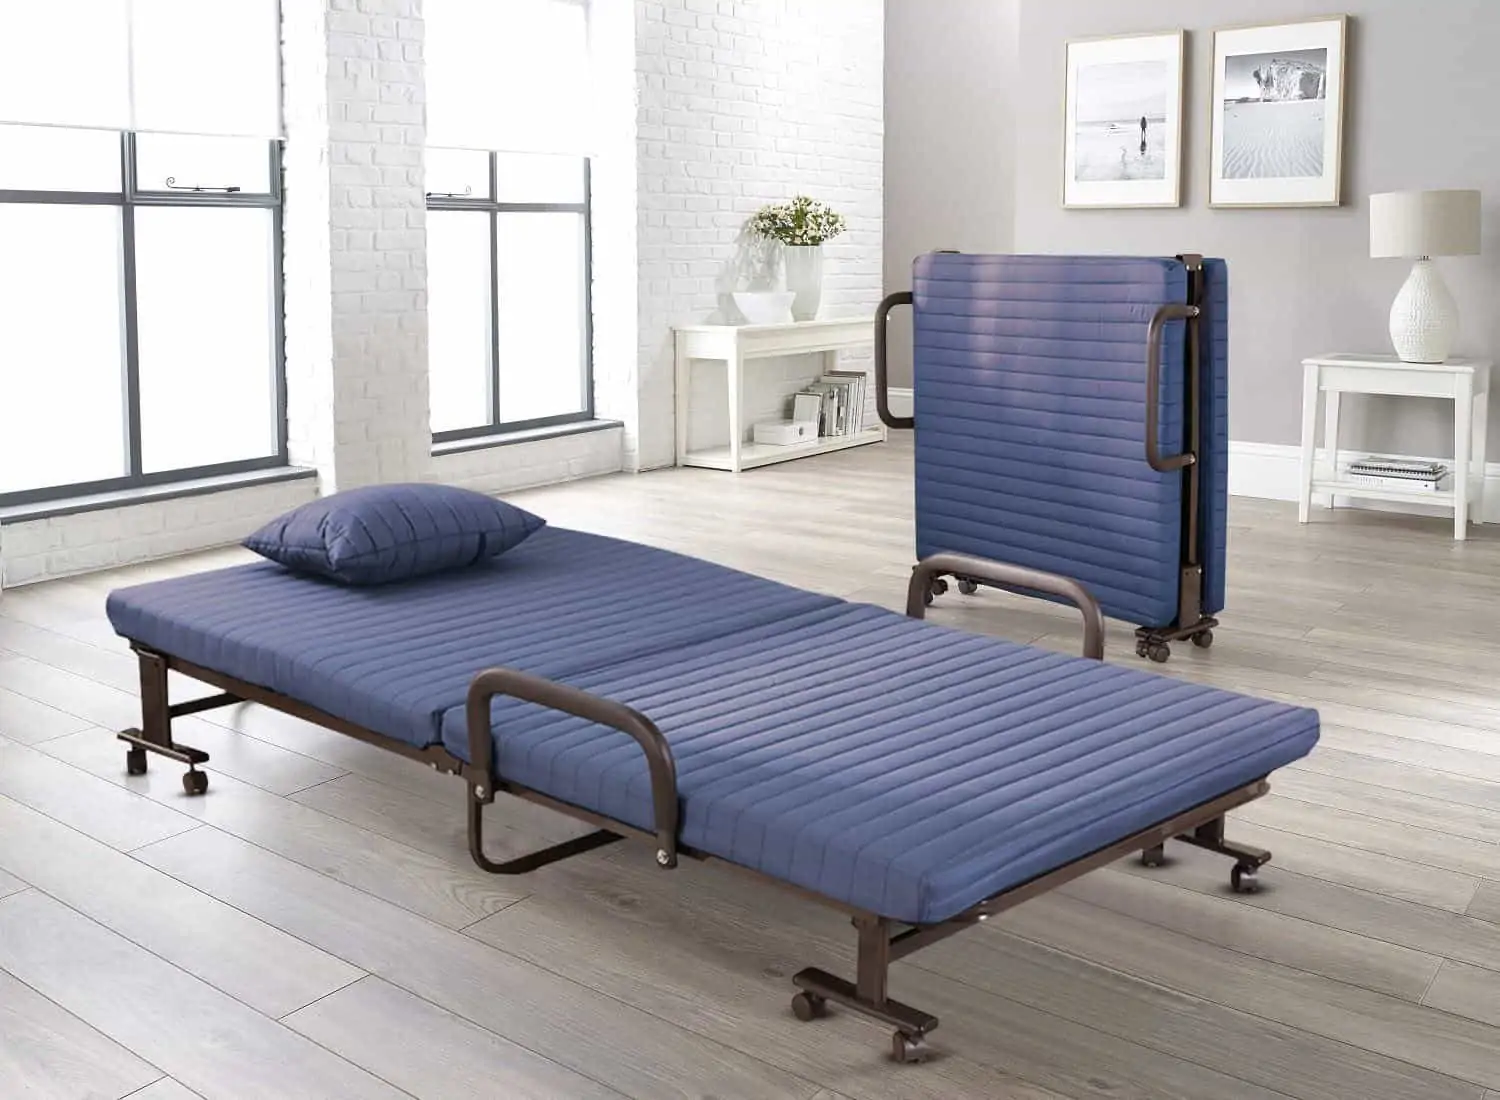  folding bed with blue mattress, space saving bed like a futon